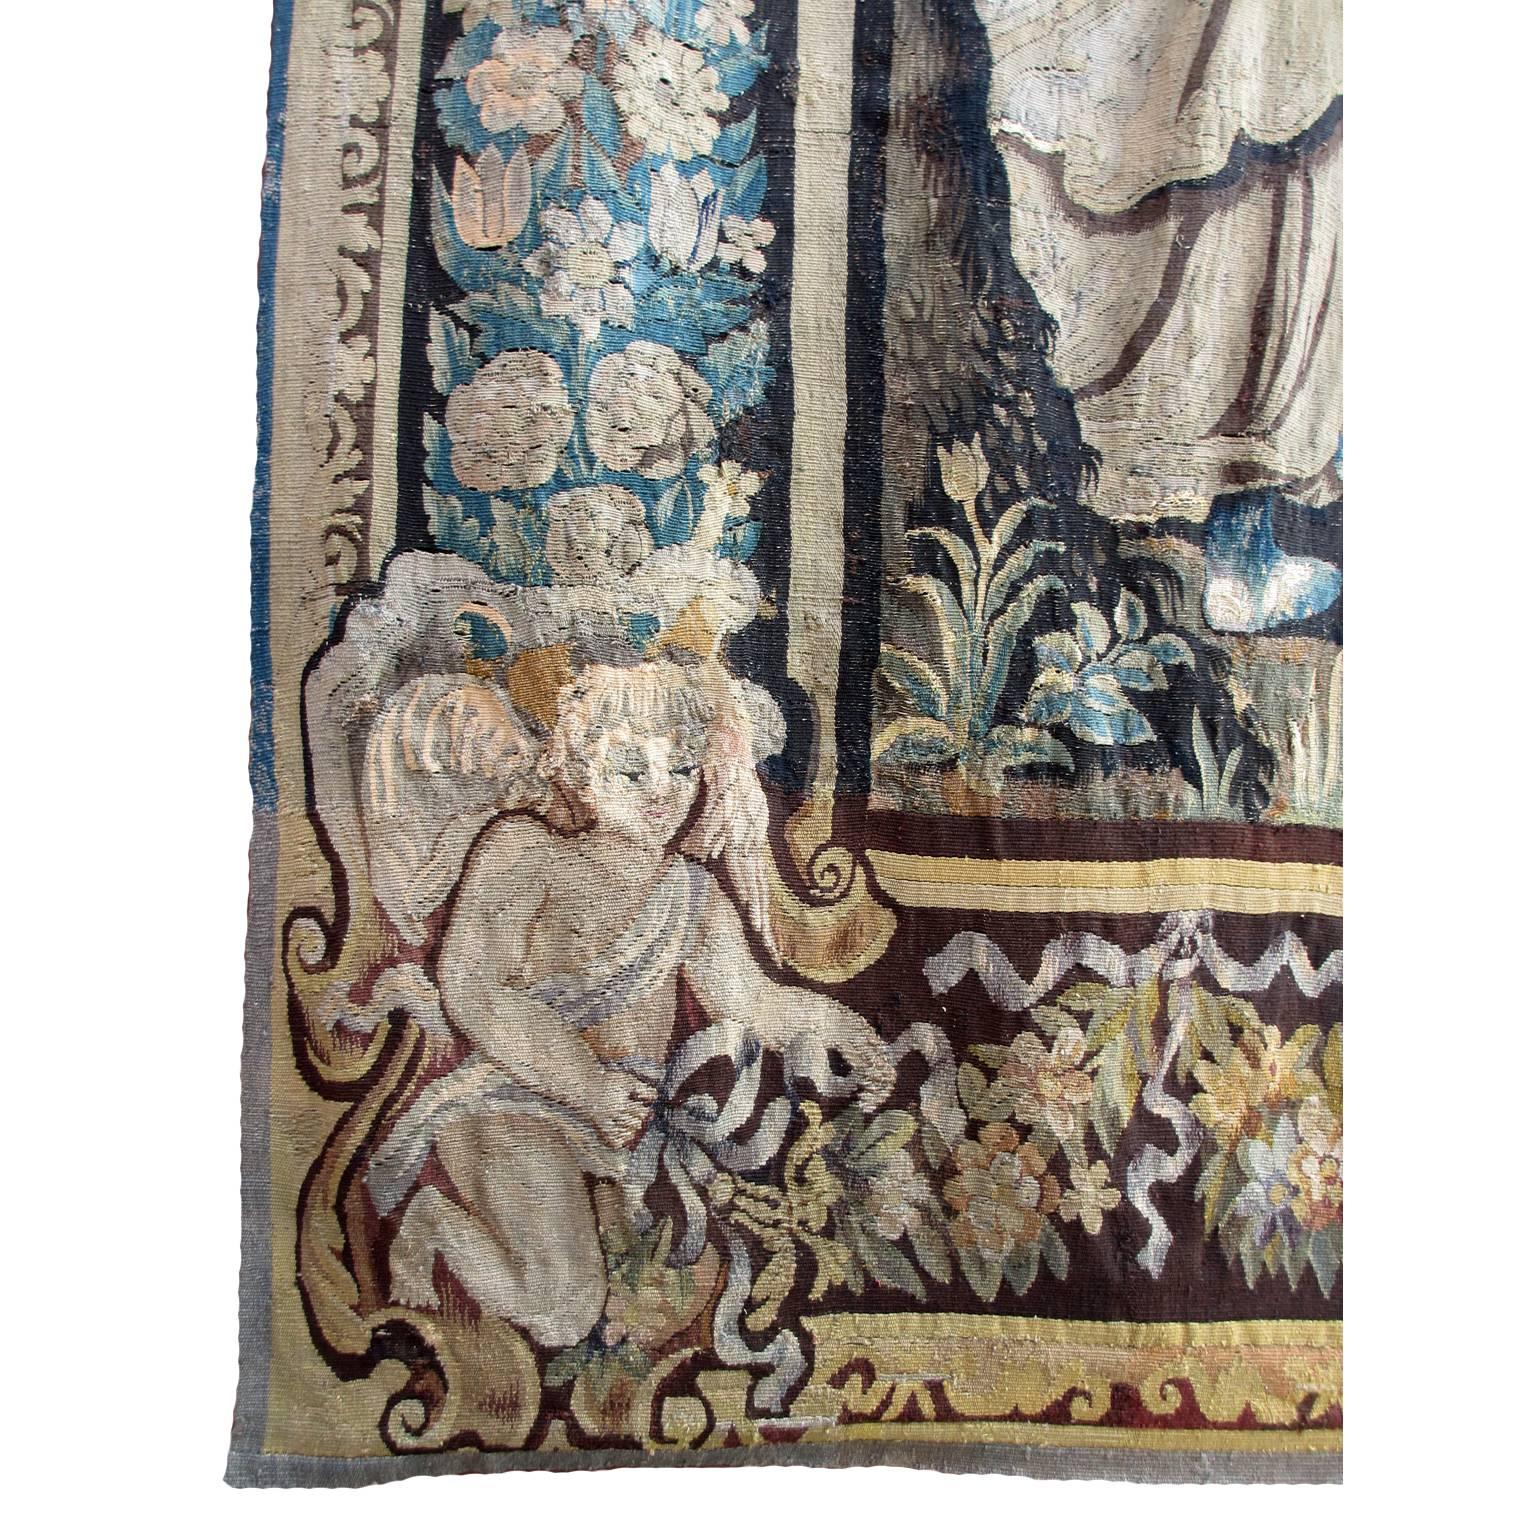 Belgian Franco-Flemish 18th Century Figural Tapestry Allegorical to 